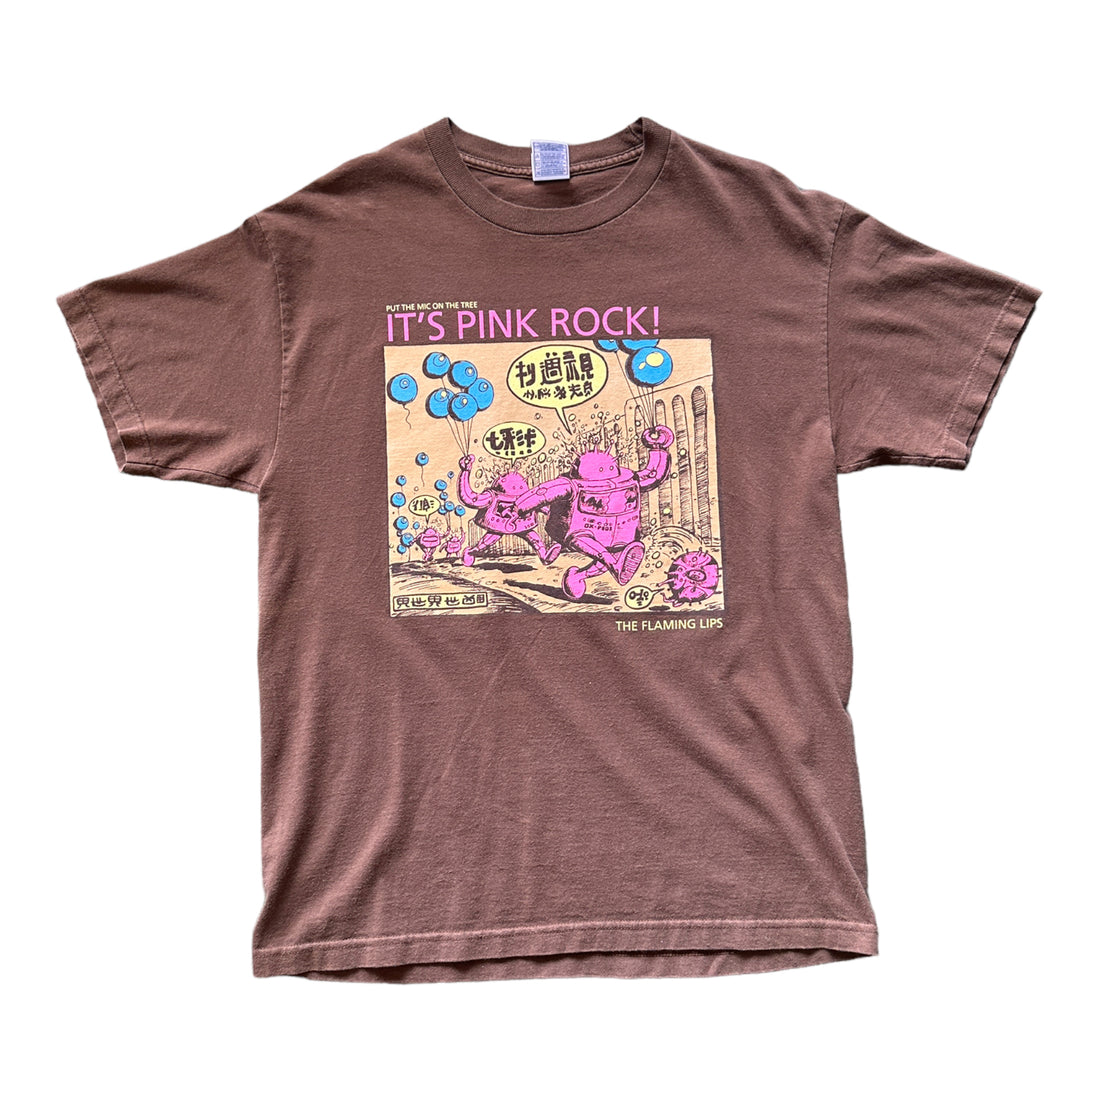 THE FLAMING LIPS “PINK ROCK” T-SHIRT BROWN ‘LARGE’ - 2000S